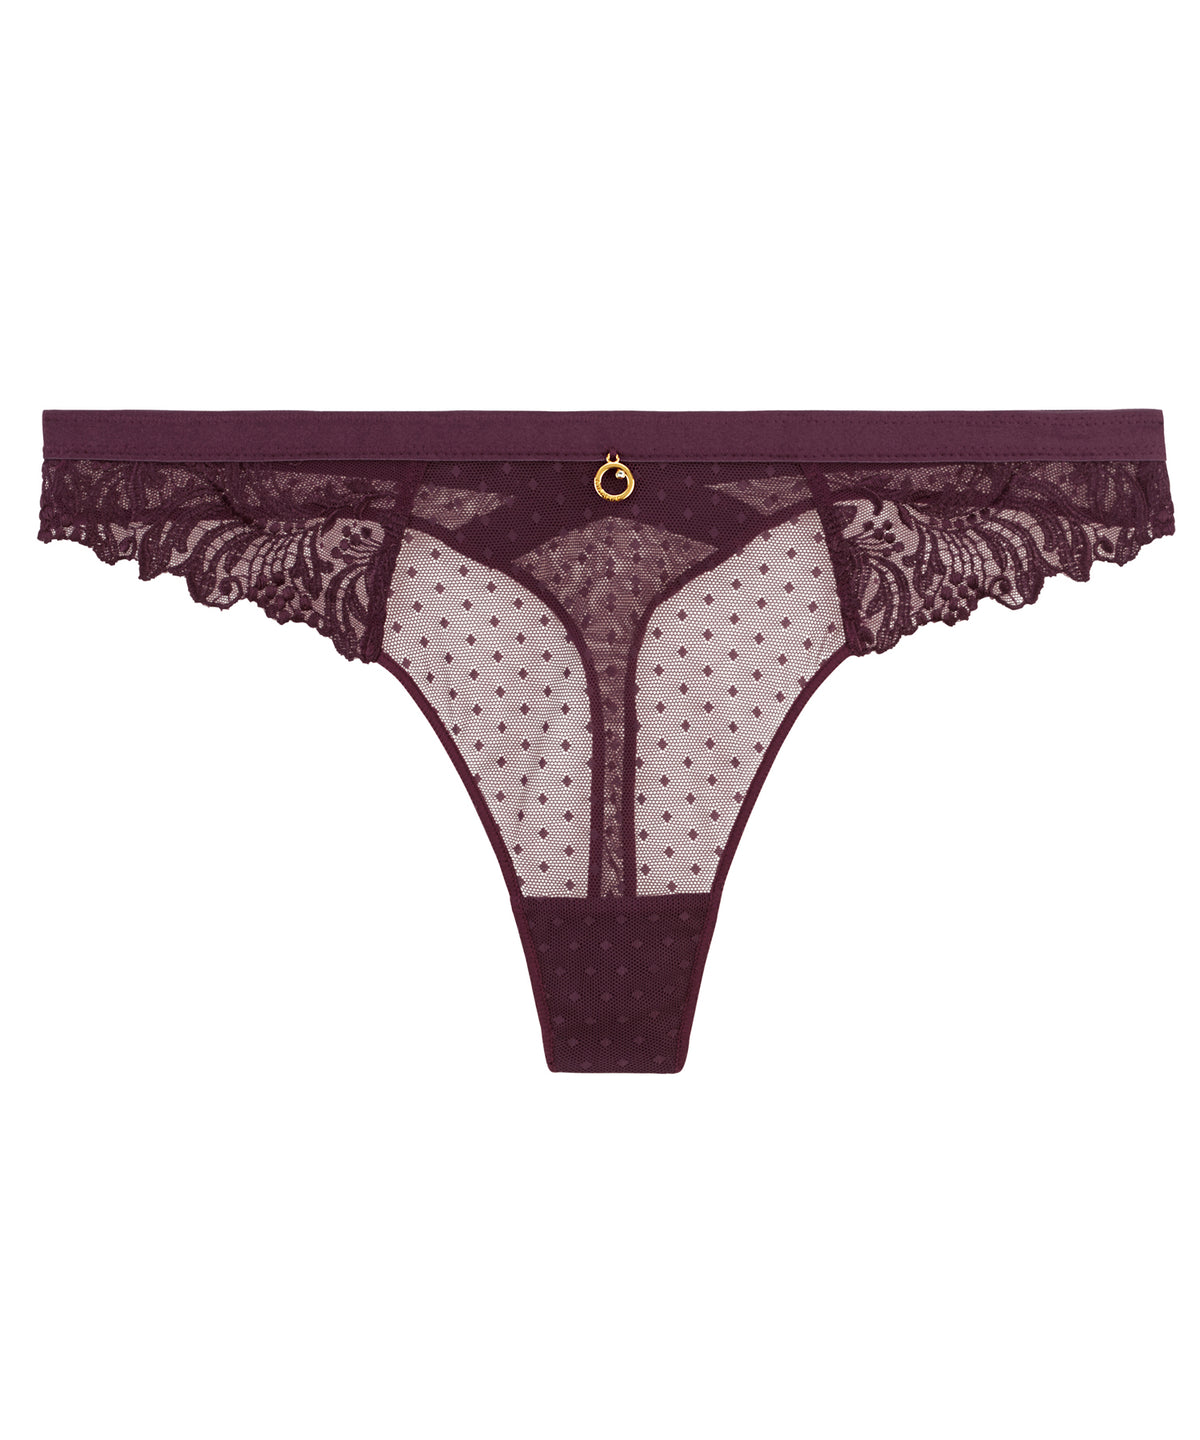 Femme Passion Wine Thong